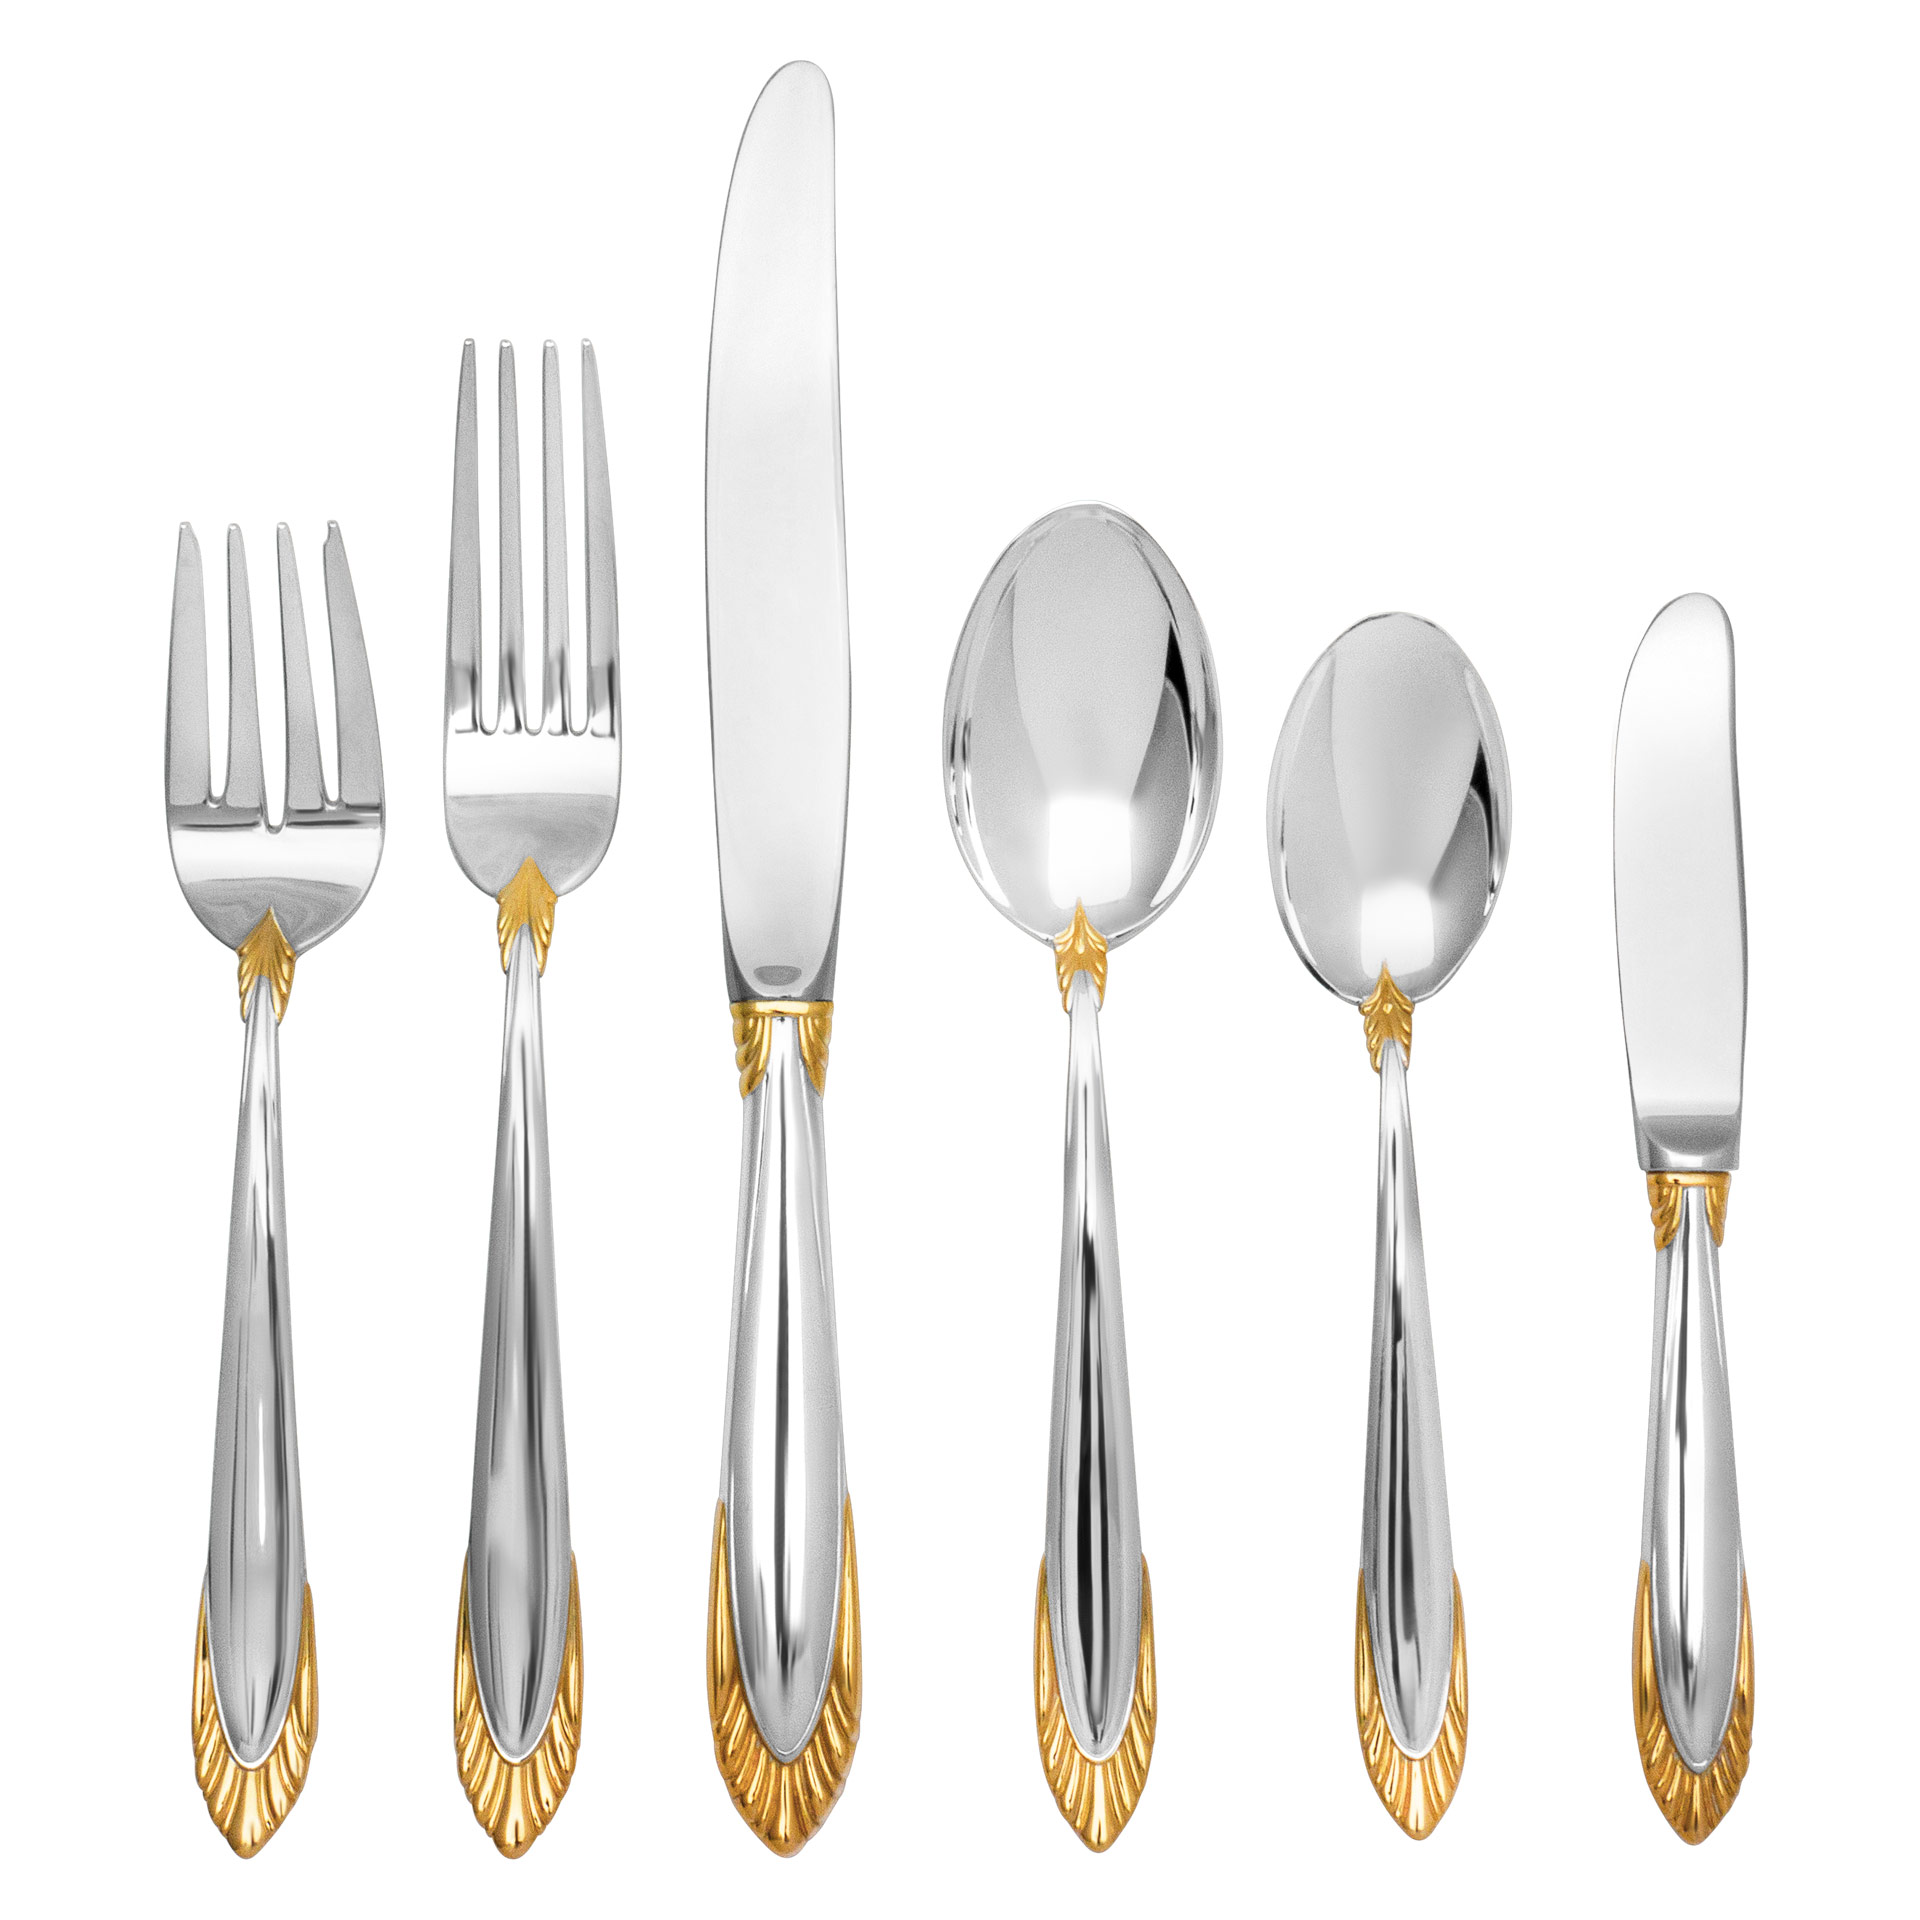 "REGENCY SHELL" flatware sterling silver set, patented in 1989 by Lunt Silversmiths-  6 place setting for 12 + 7 serving pieces-  Over 90 oz troy sterling silver